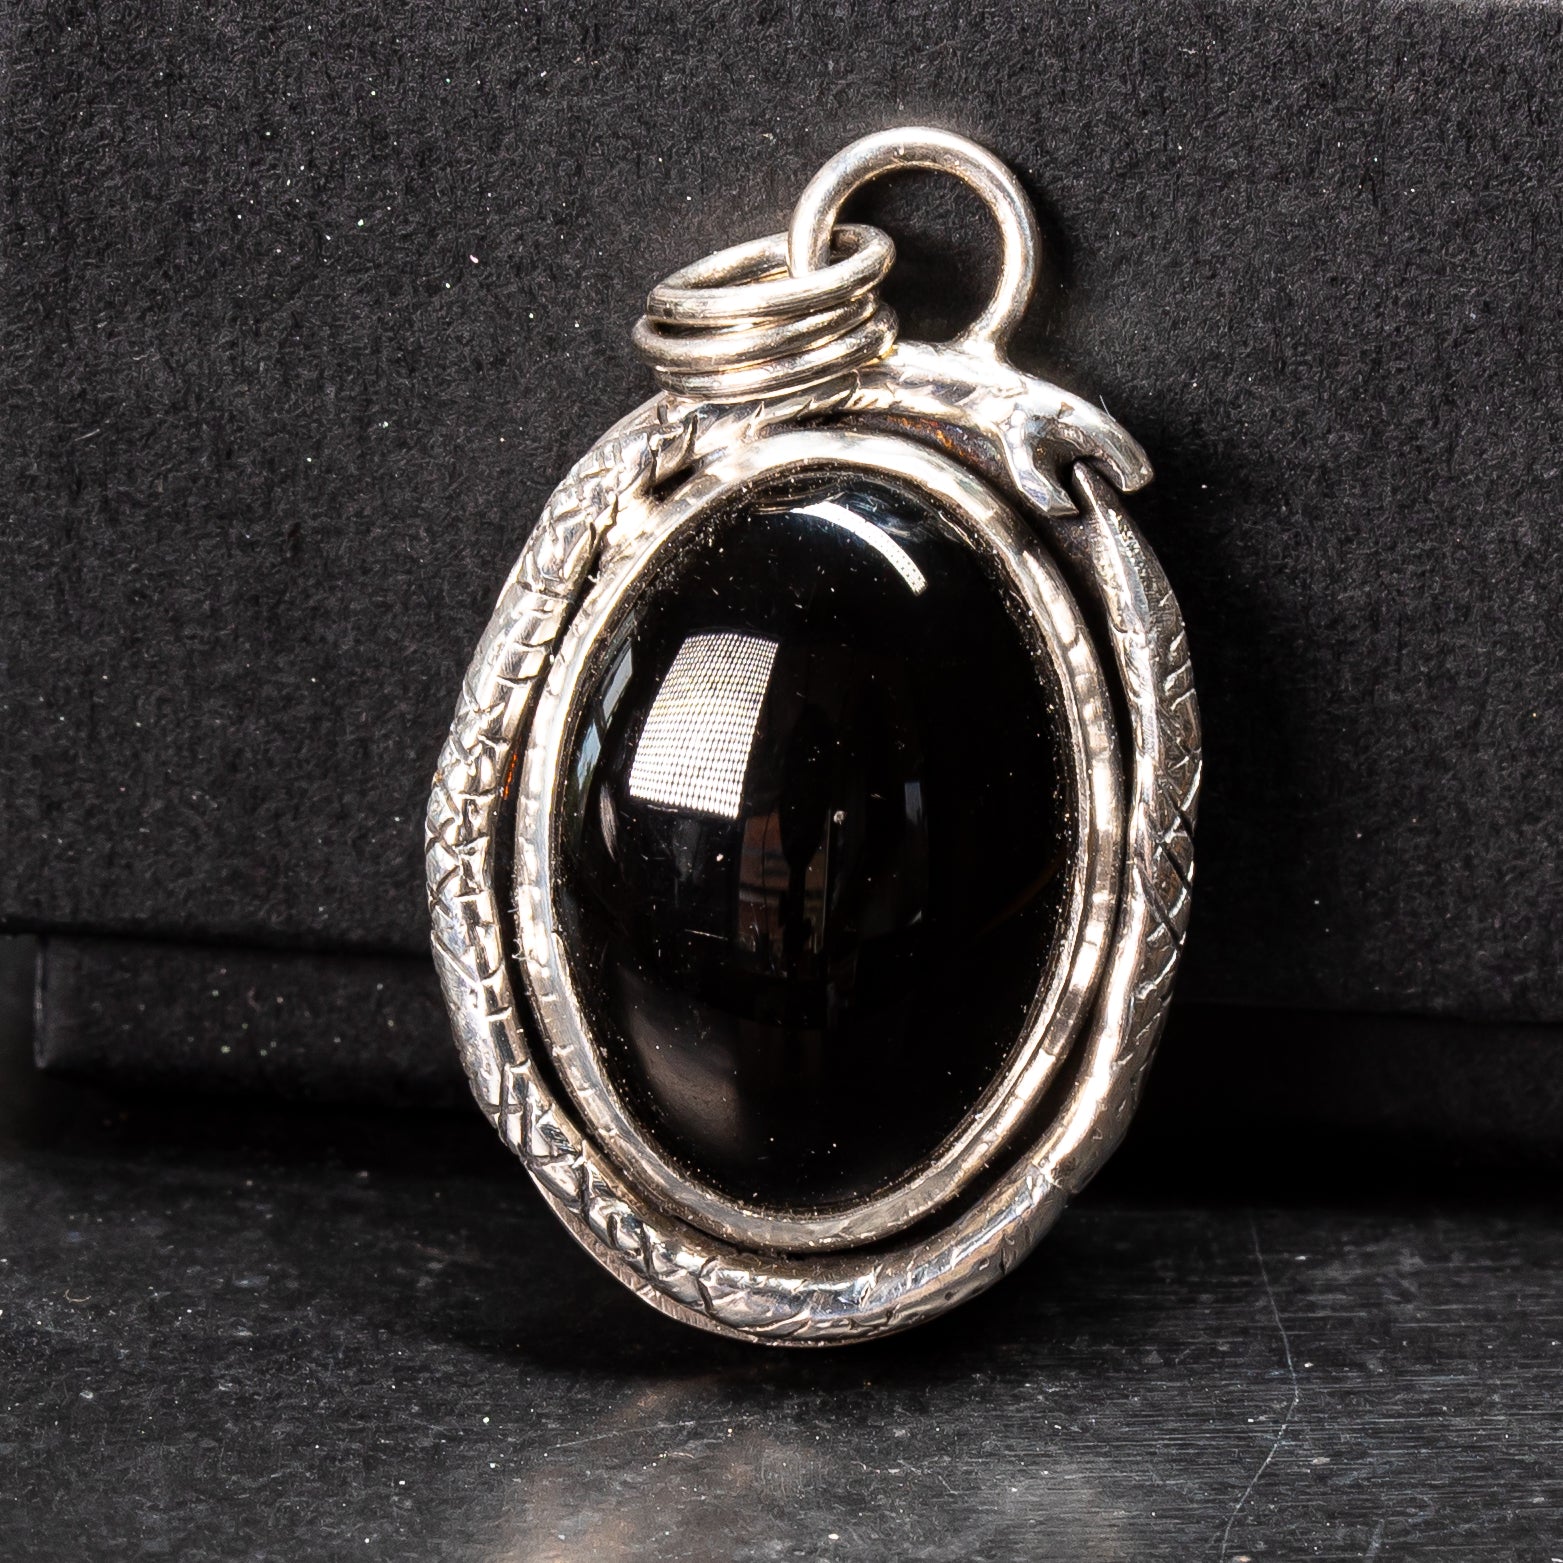 Black Onyx Snake Pendant with Lily of the Valley